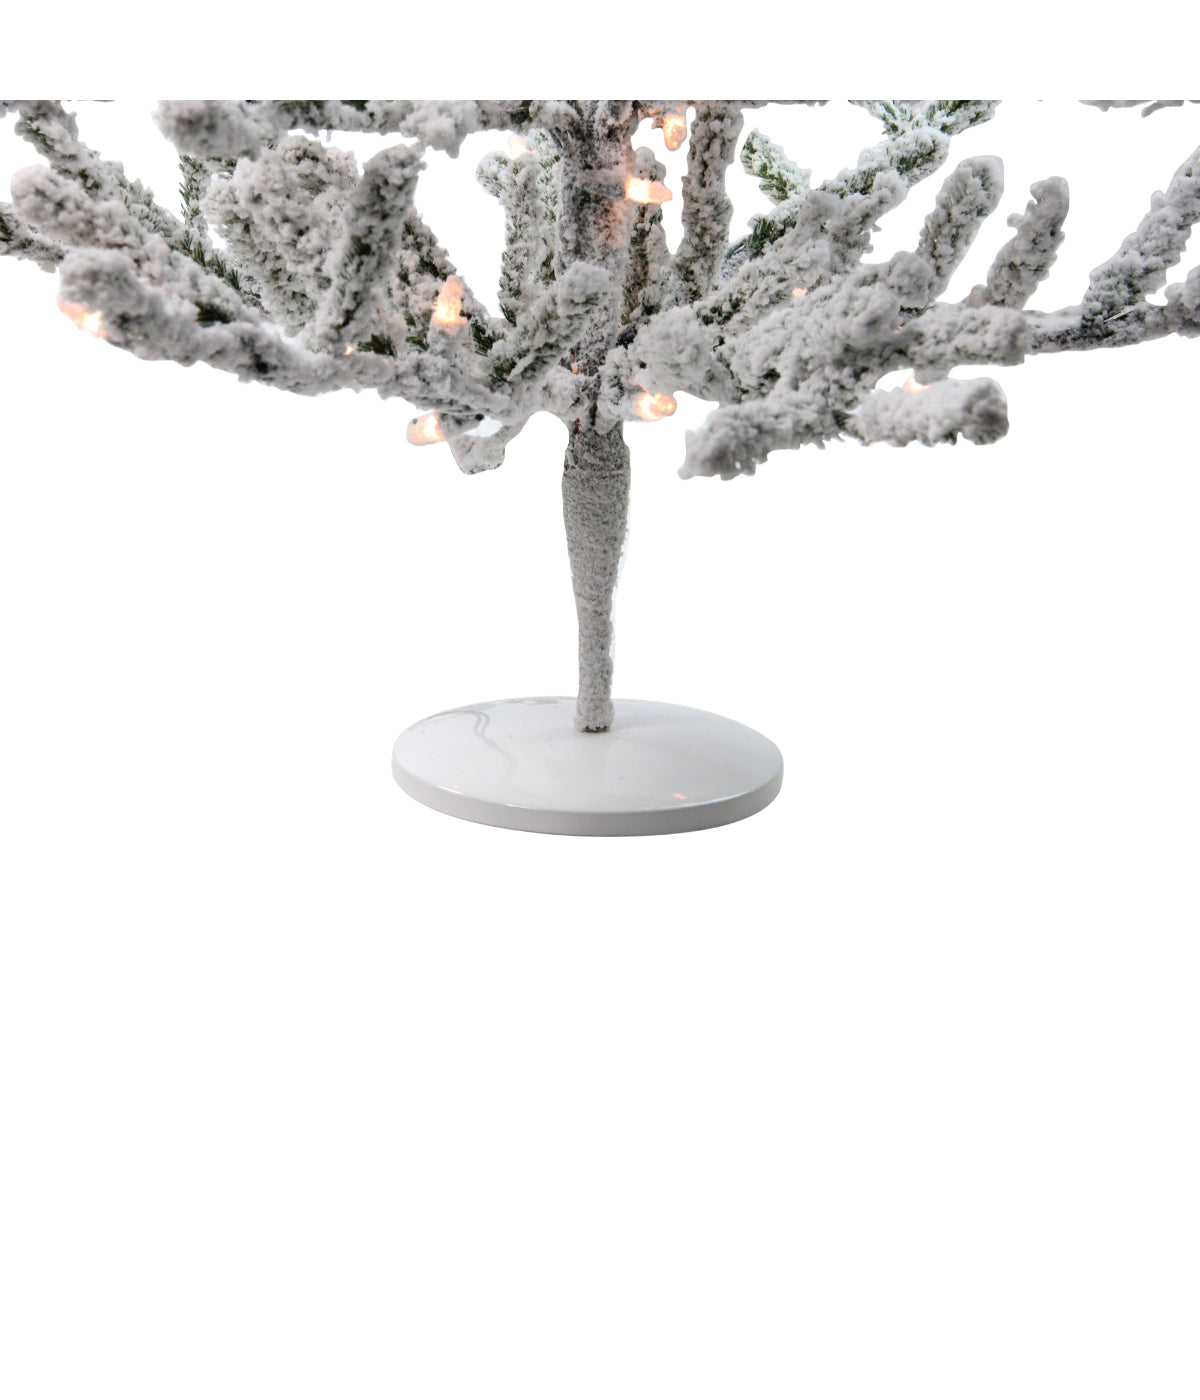 Flocked Alpine Twig Artificial Christmas Tree with Pre-Lit Warm White Lights, 3'